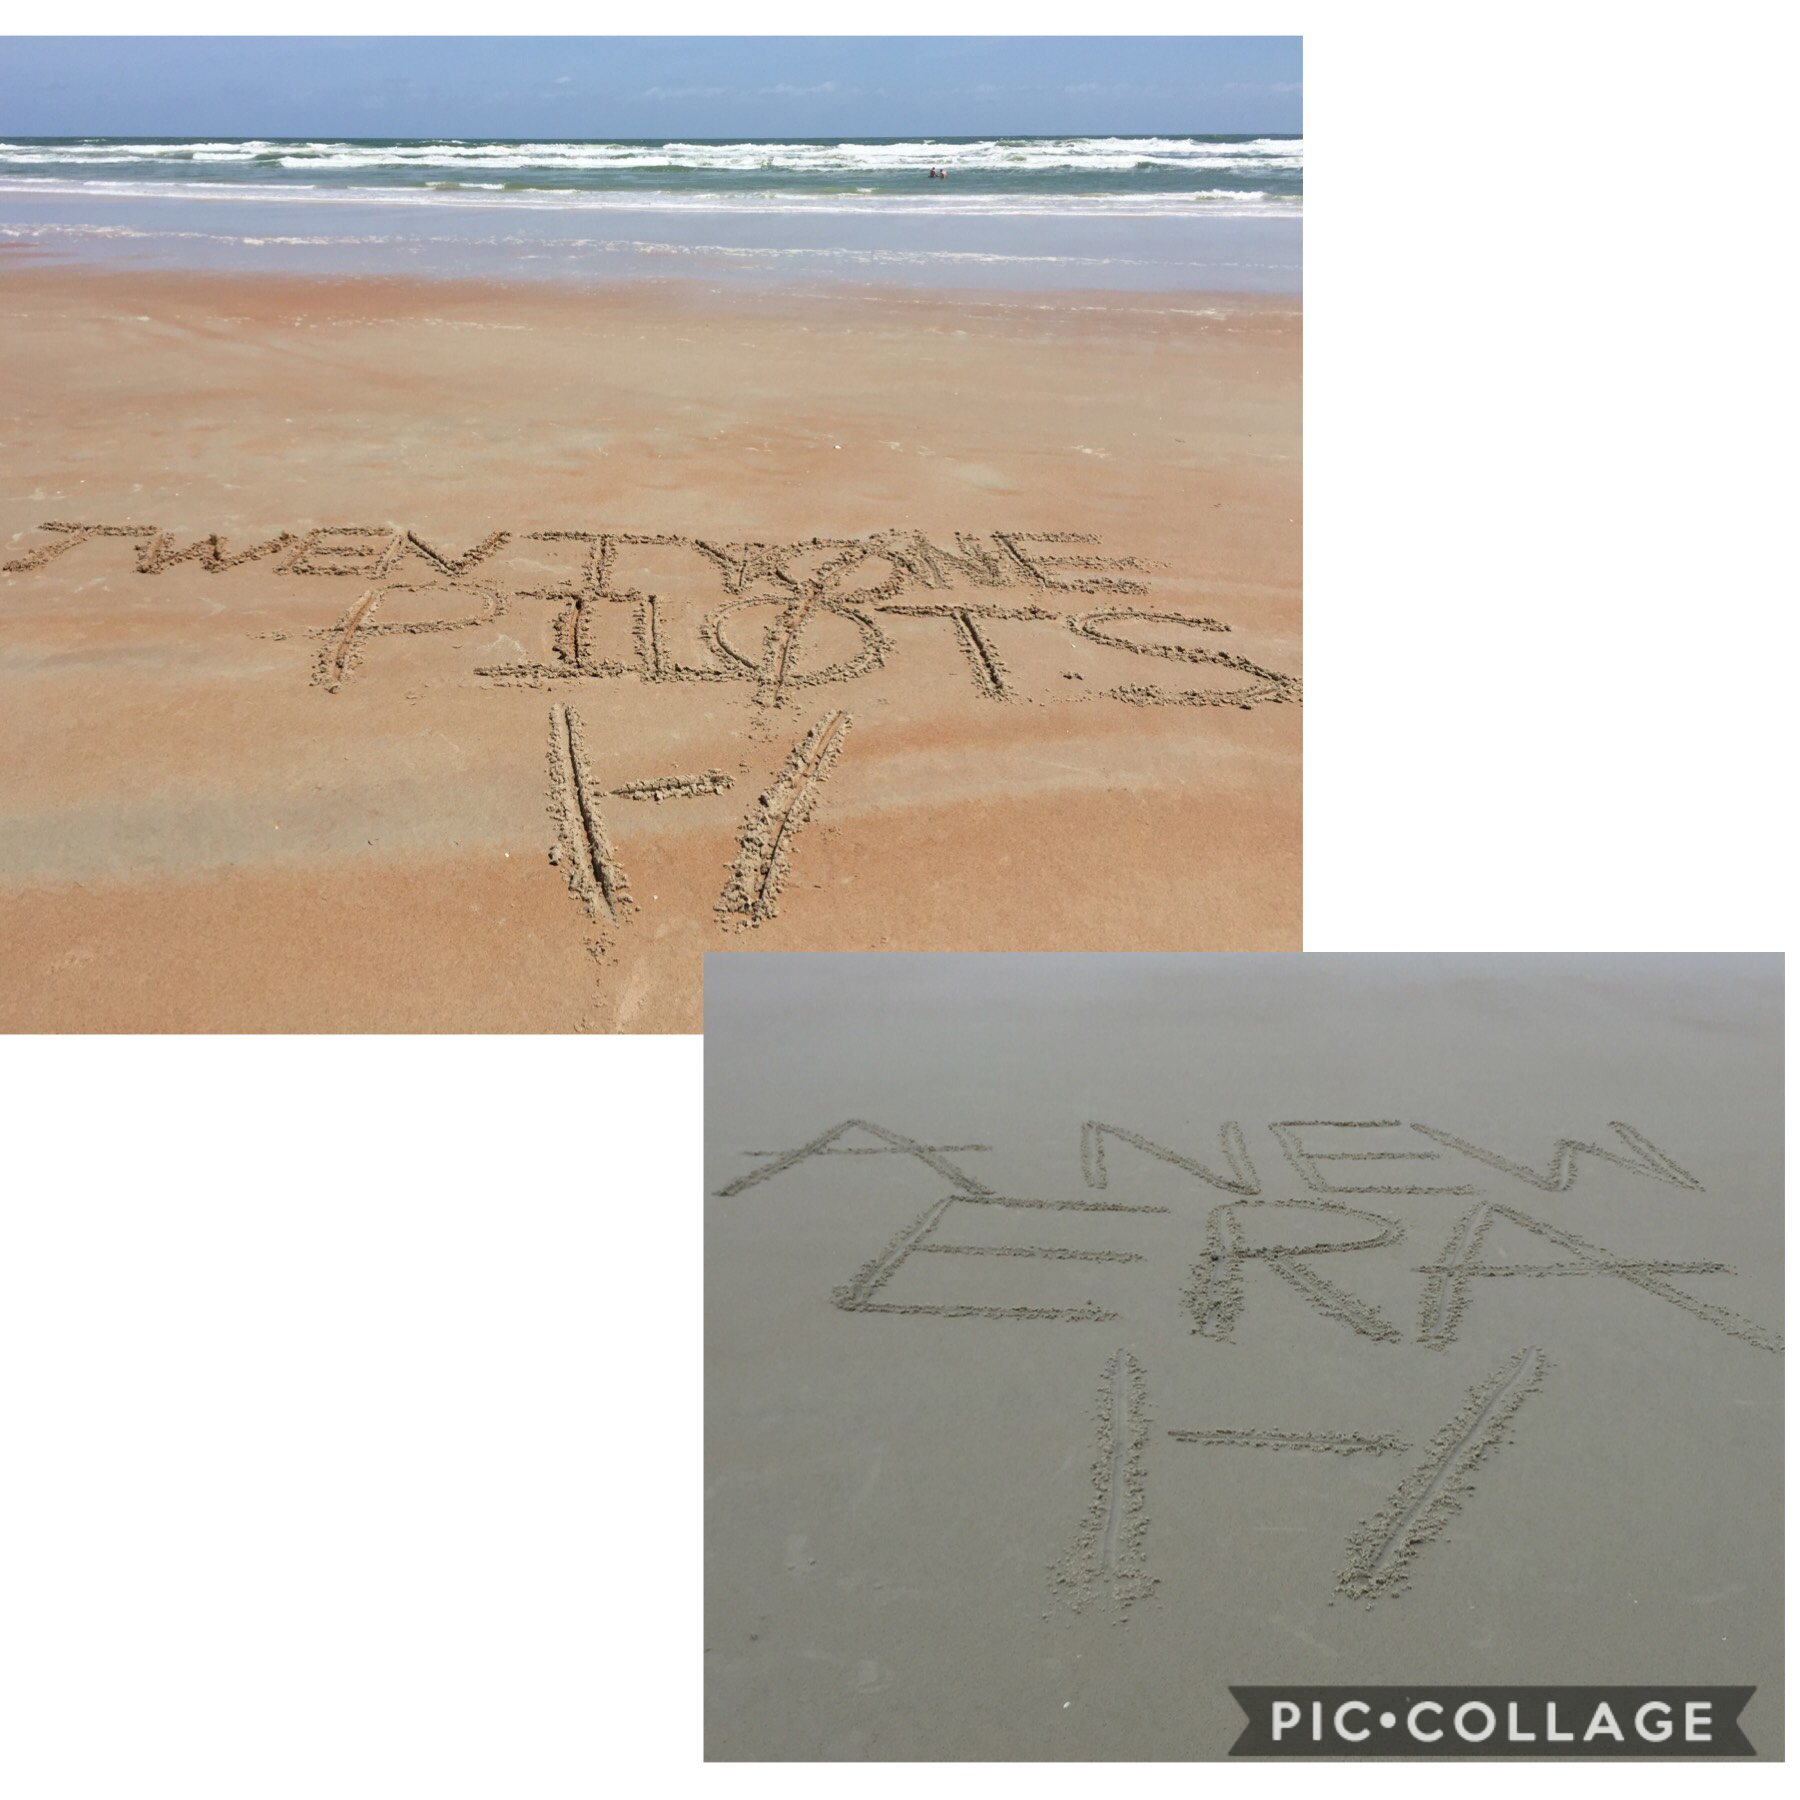 I’ve been writing tøp stuff on the beach for two years- soon to be three cause I’m going to florida on the 6th!! Also if u want me 2 write anything in the sand comment and I’ll do it lol